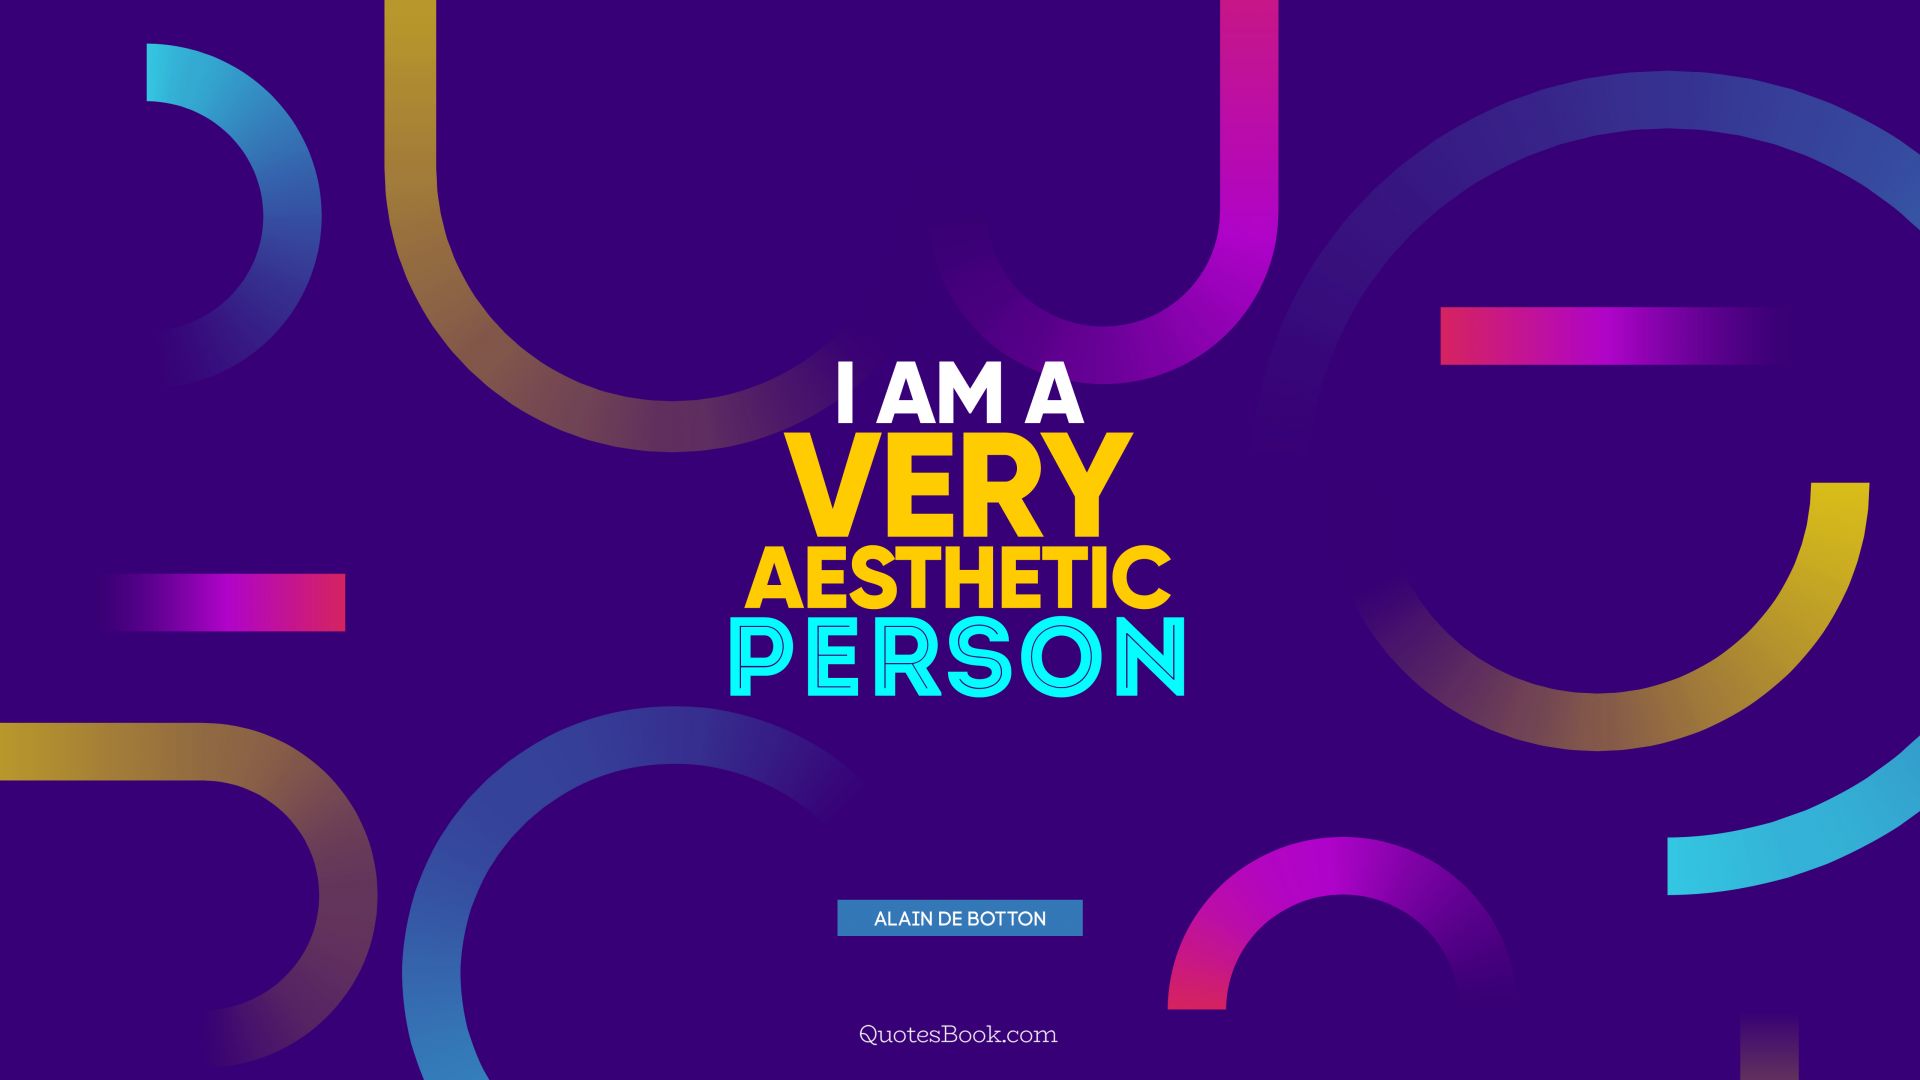 I am a very aesthetic person. - Quote by Alain de Botton